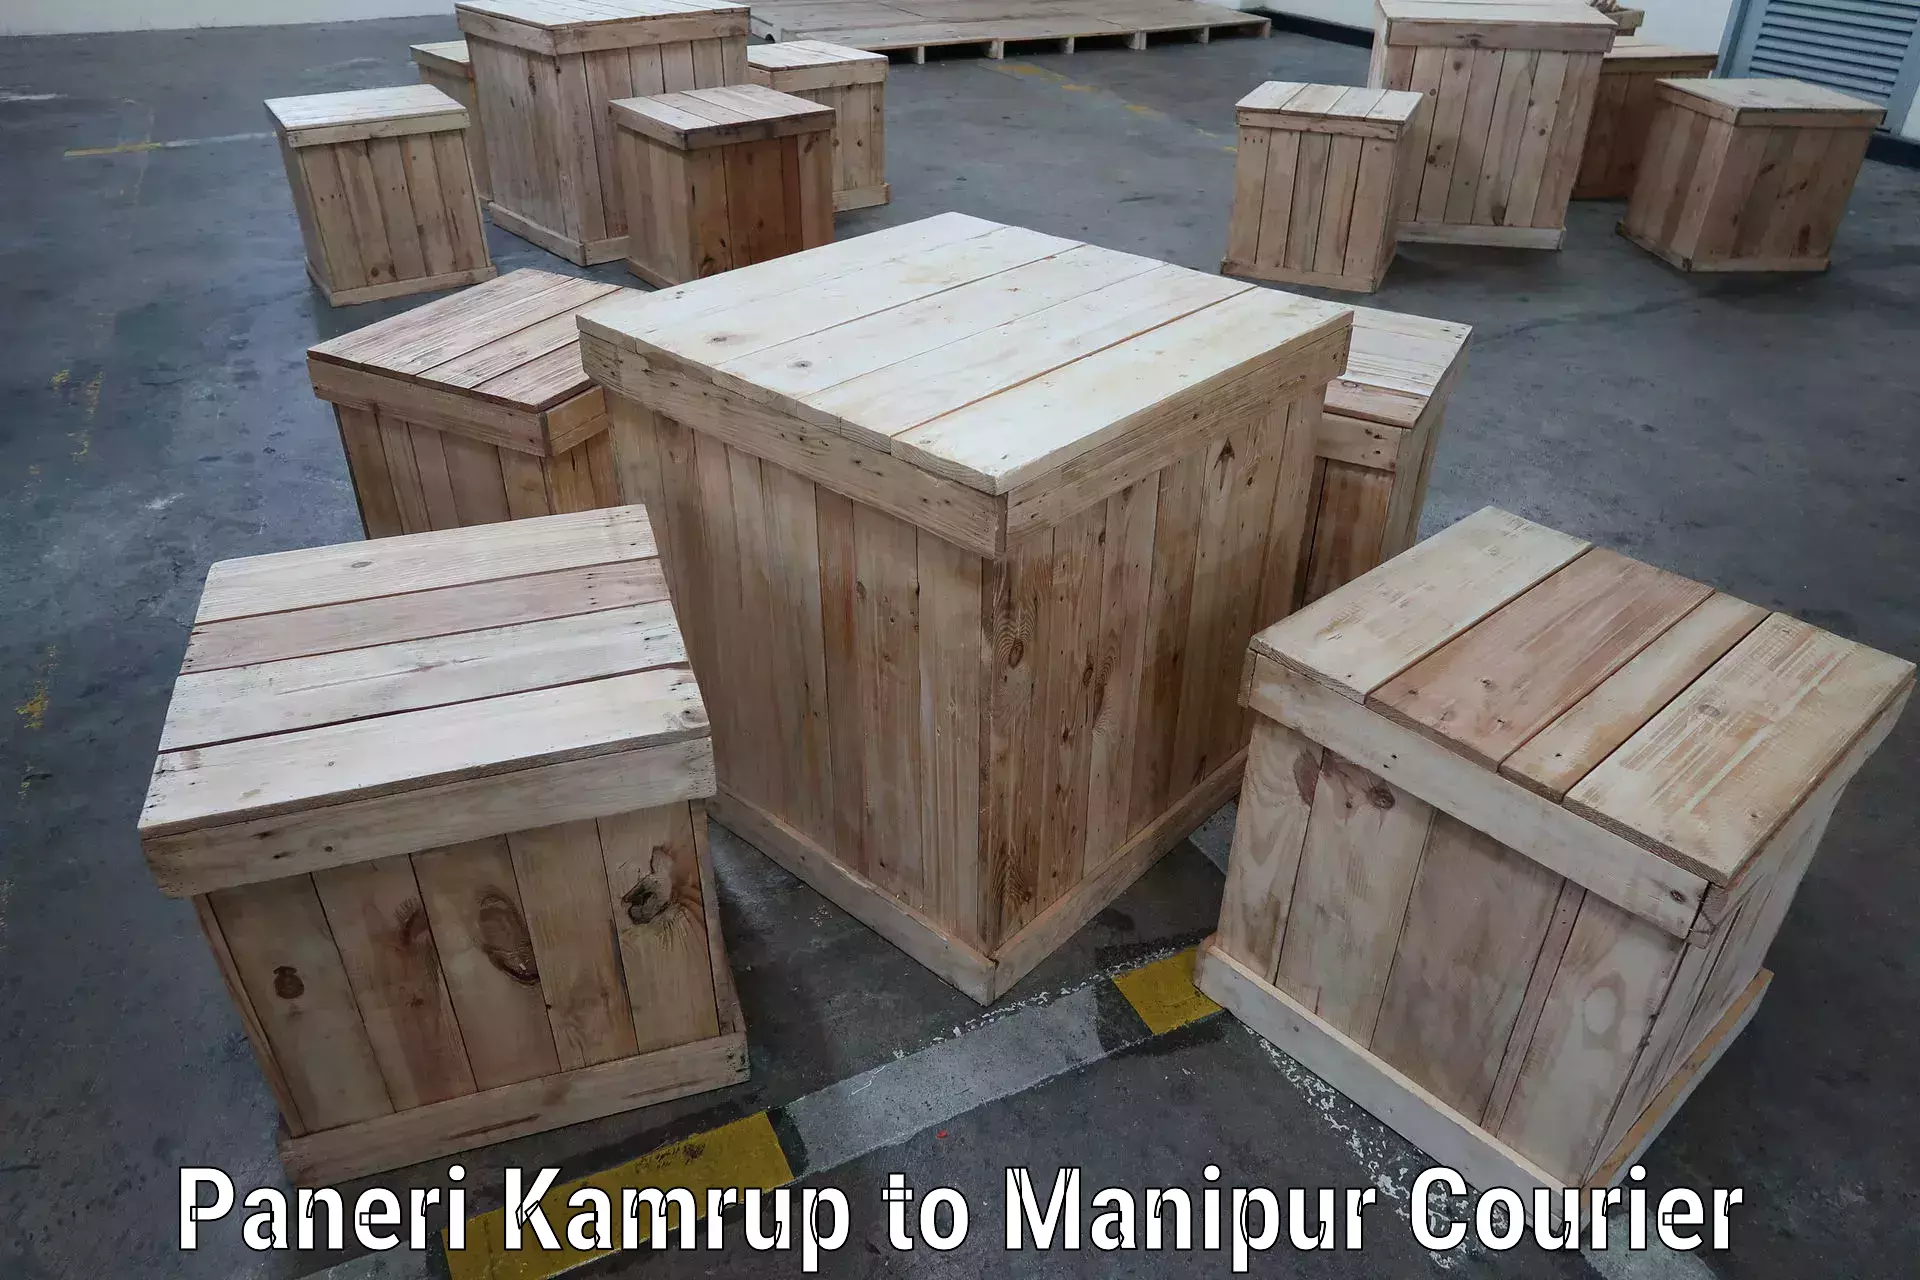 State-of-the-art courier technology in Paneri Kamrup to Manipur